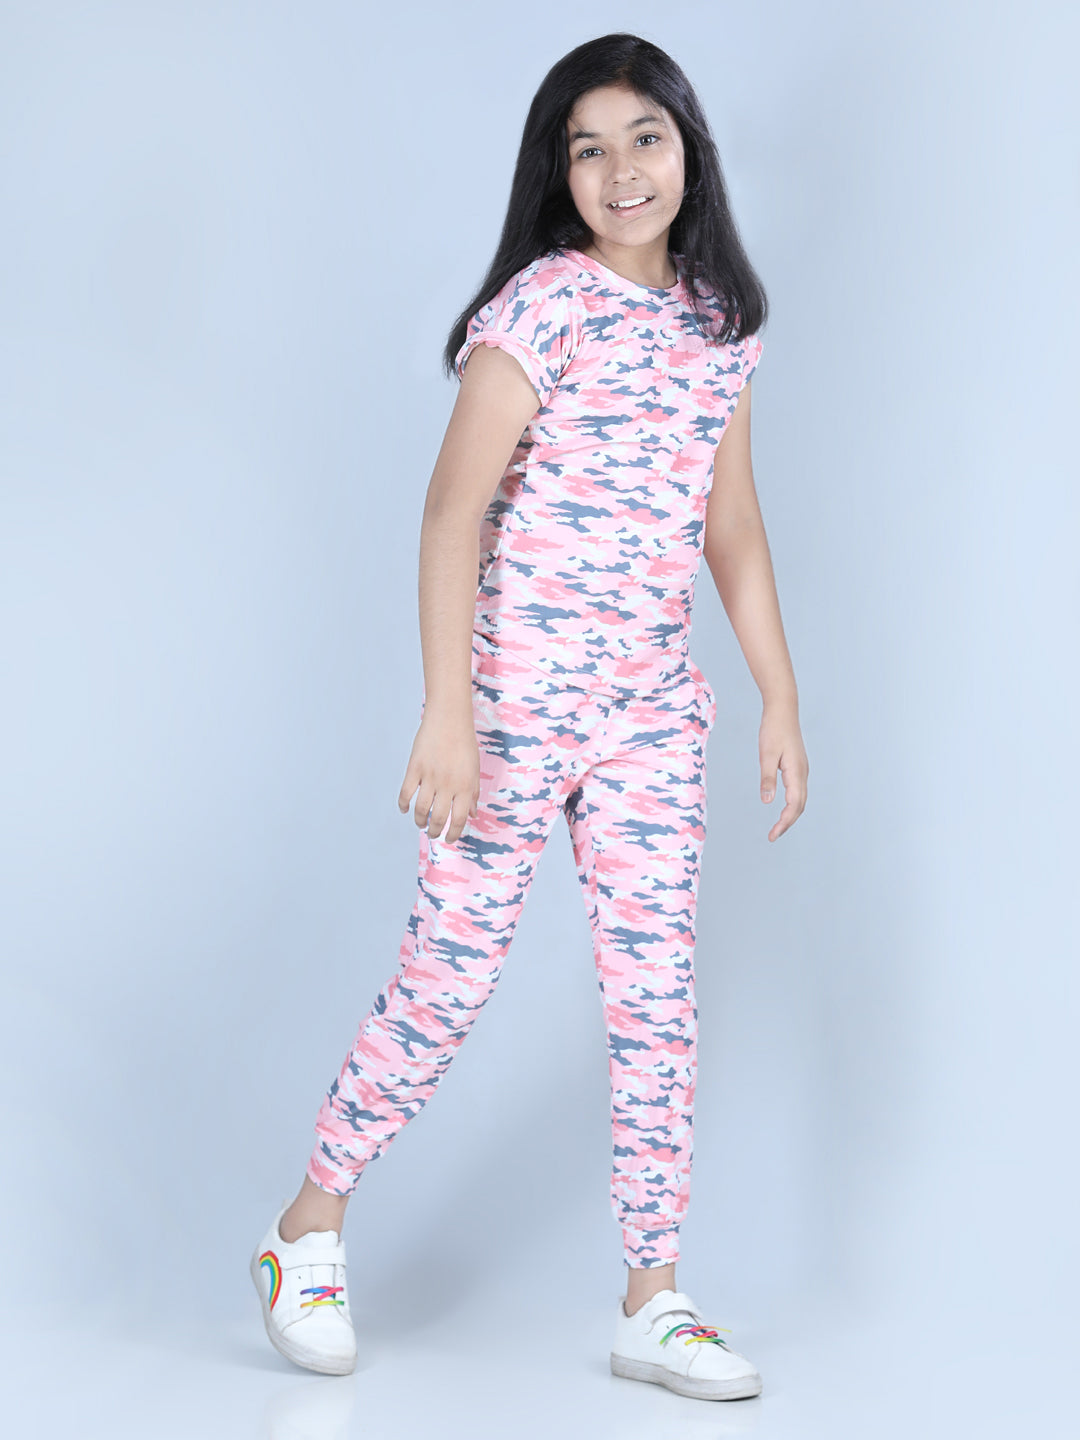 Girls Multicolored Tie & Dye Polyester Blend Track Suit Set